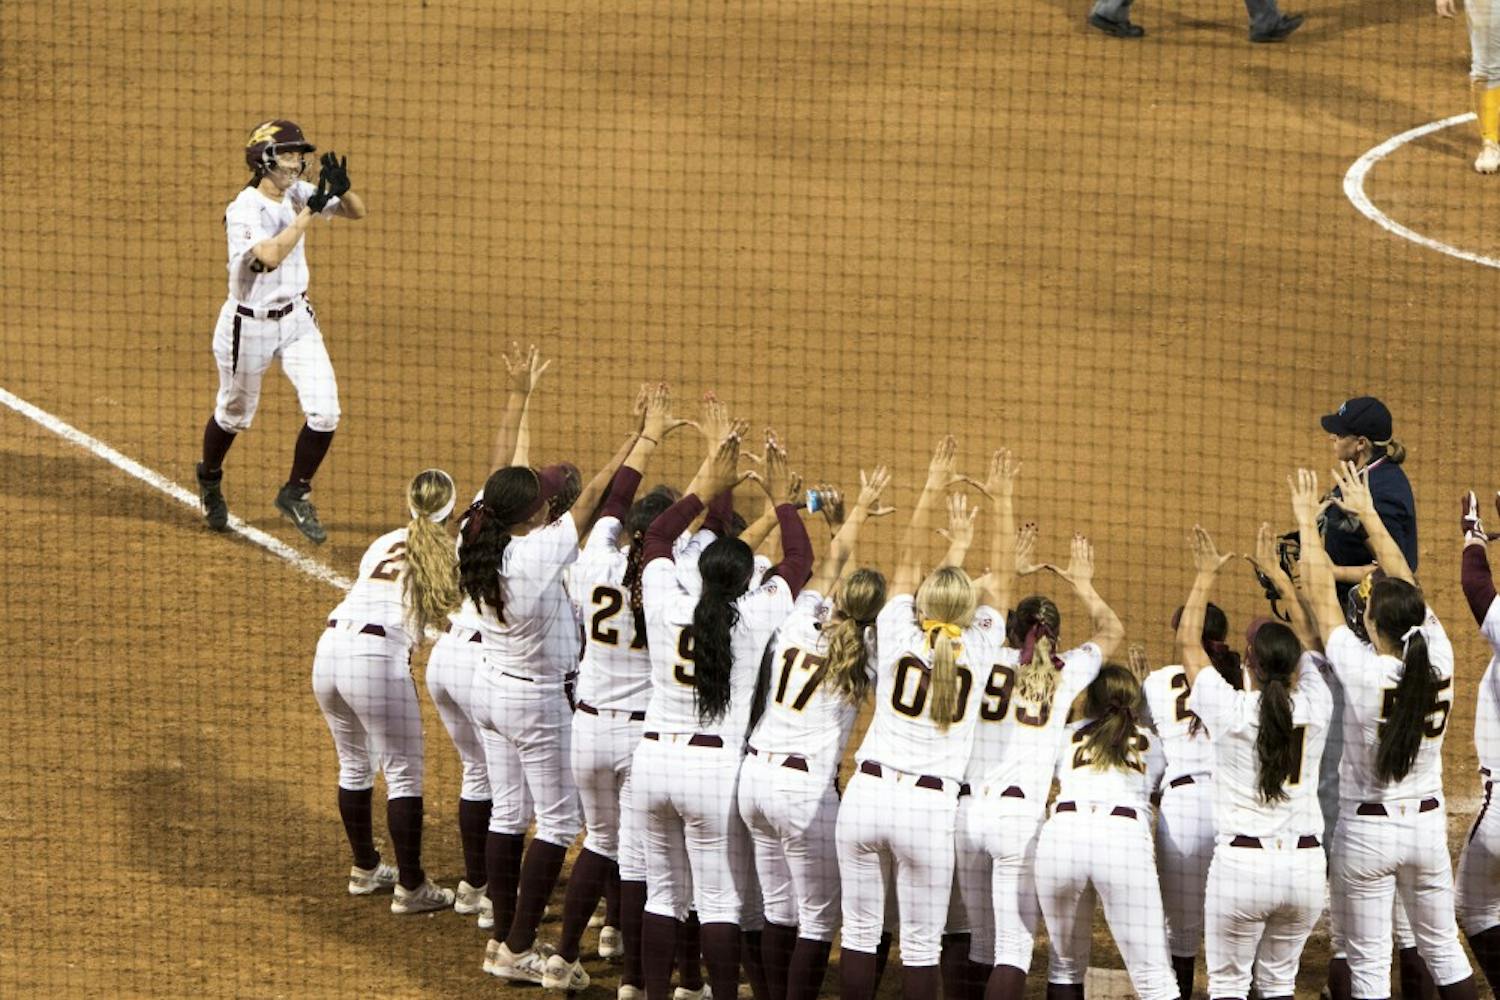 Freshman Brynley Steele celebrates after hitting a game-tying homerun in the bottom of the fifth inning against California at Farrington Stadium in Tempe  on Friday March 20, 2015. The Sun Devils defeated the Bears 8-7. (Jacob Stanek/ The State Press)